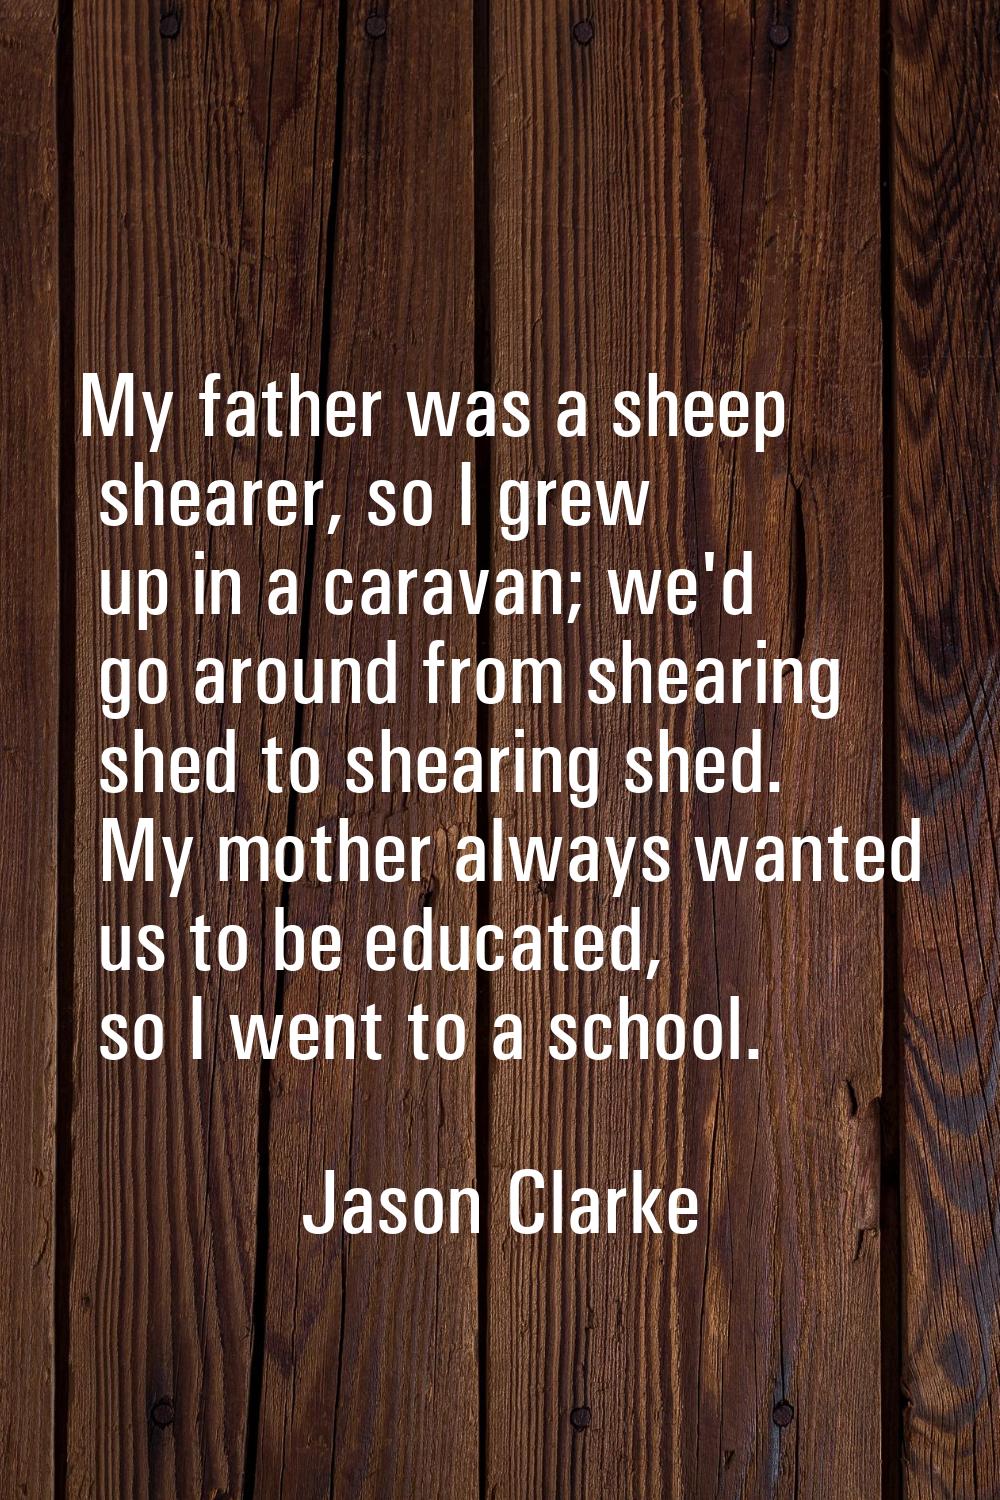 My father was a sheep shearer, so I grew up in a caravan; we'd go around from shearing shed to shea